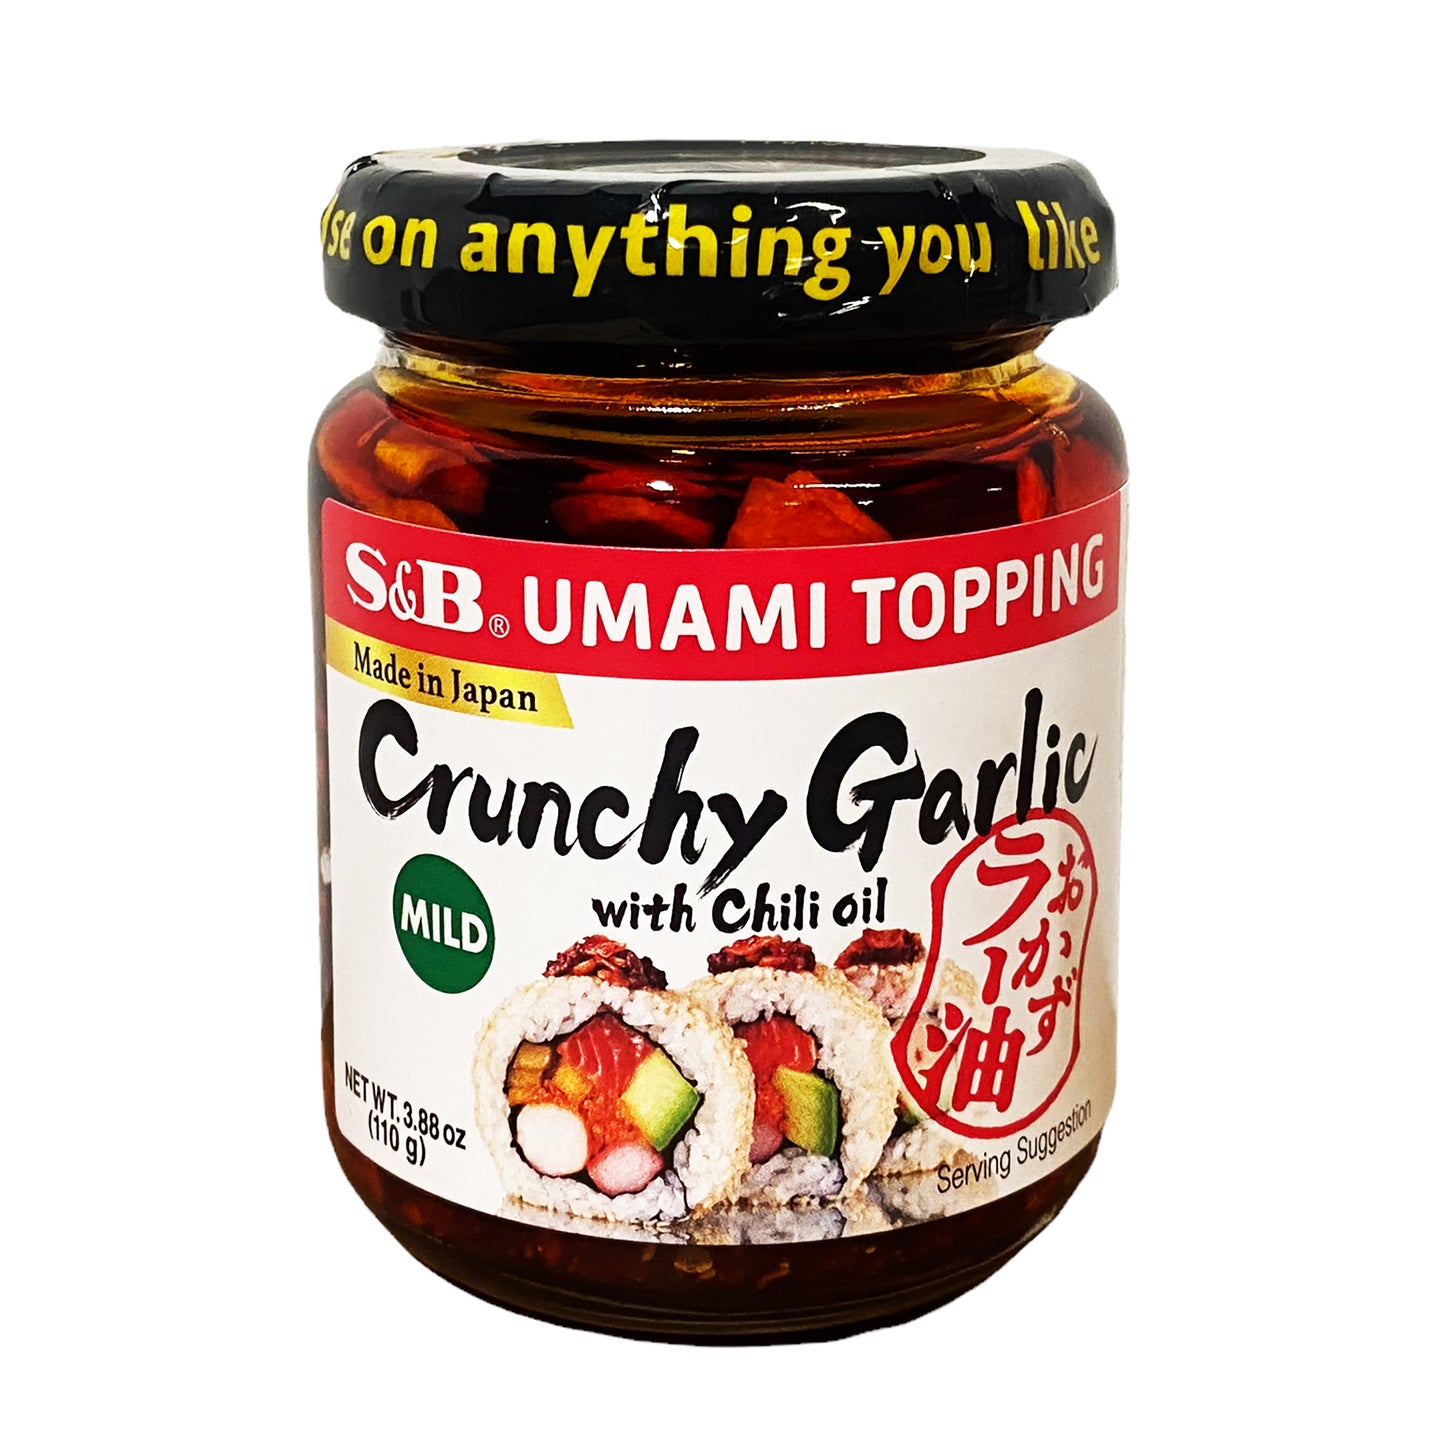 Front graphic image of S&B Crunchy Garlic With Chili Oil Mild 3.88oz